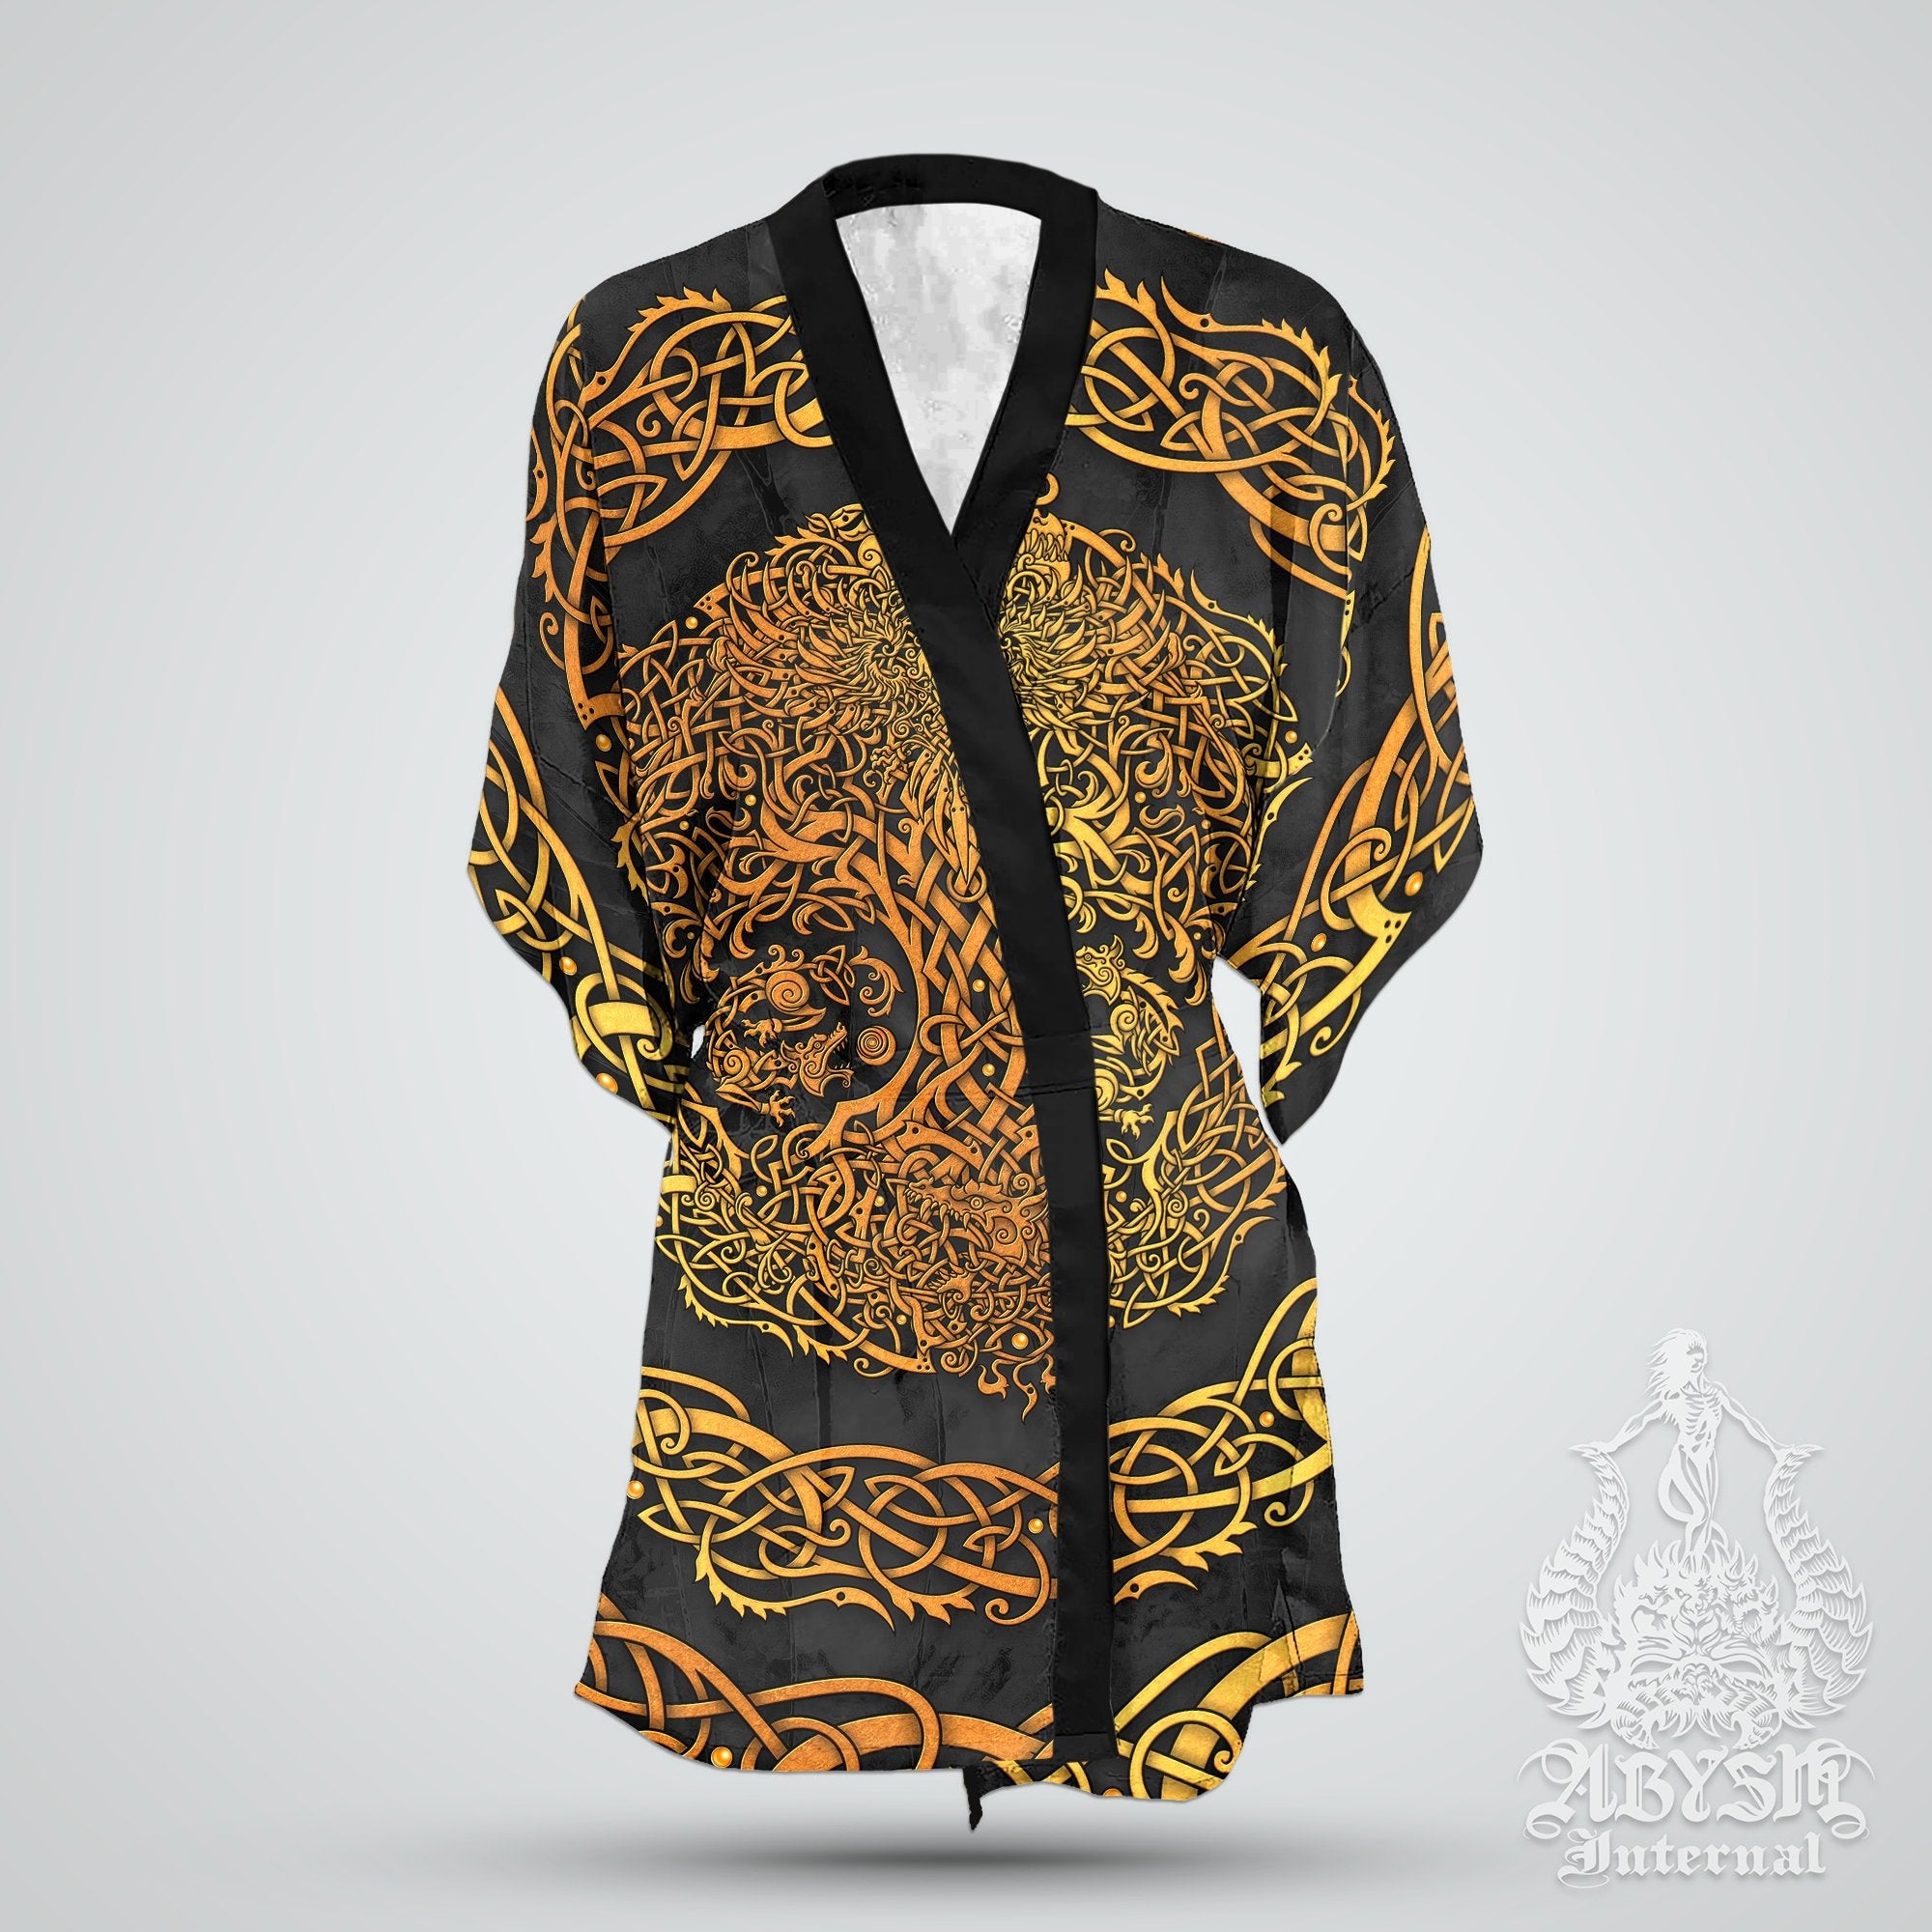 Viking Cover Up, Beach Outfit, Yggdrasil Party Kimono, Summer Festival Robe, Norse Indie and Alternative Clothing, Unisex - Tree of Life, Gold Black - Abysm Internal